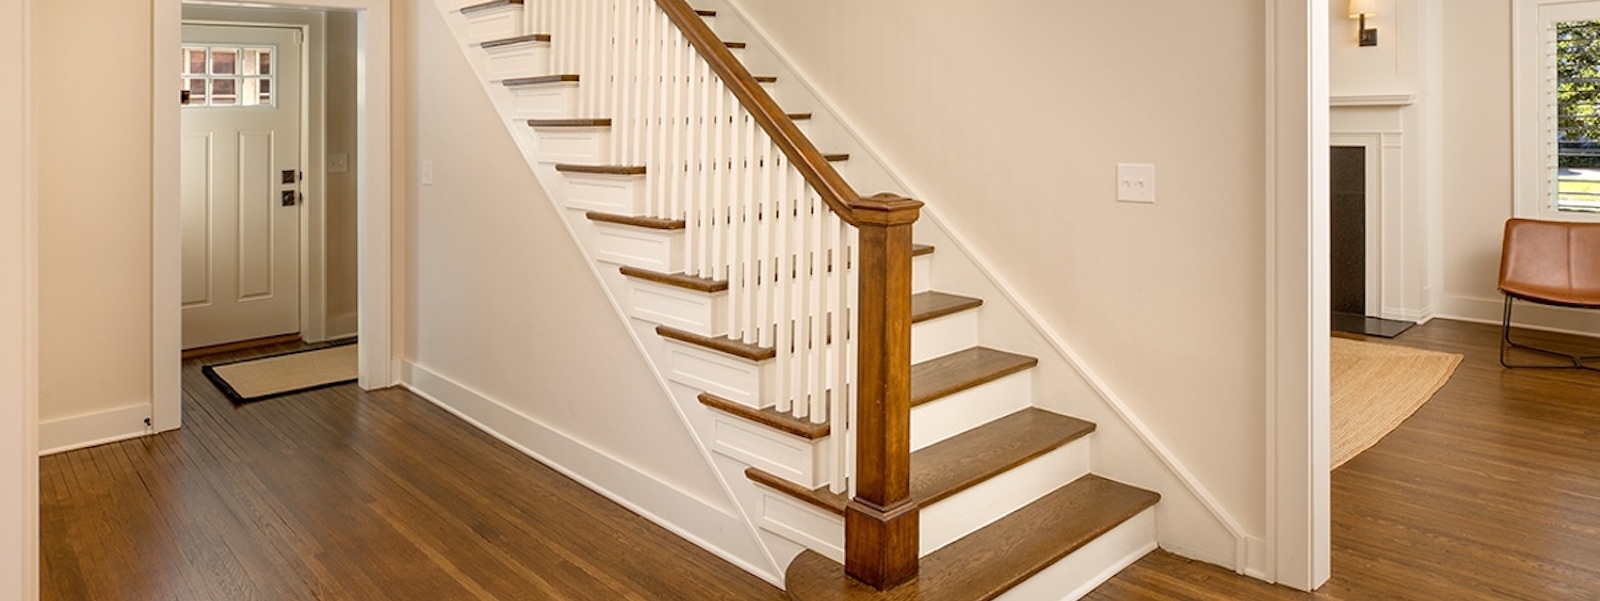 A staircase in a renovated house.